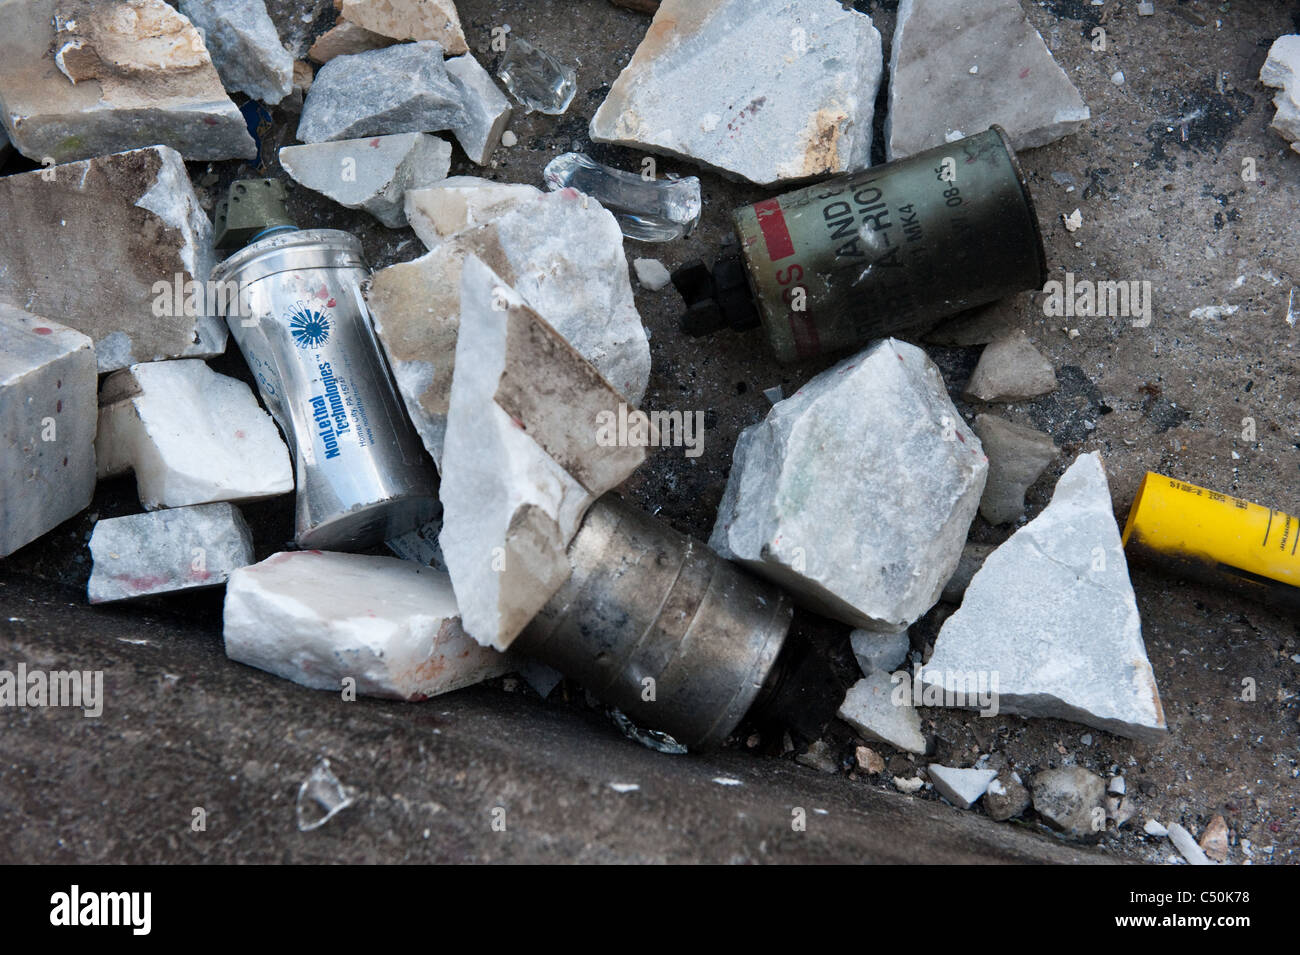 Used CS (Orthochlorobenzalmalononitrile) tear-gas canisters in Syntagma (Constitution) square during the protests in Athens Stock Photo